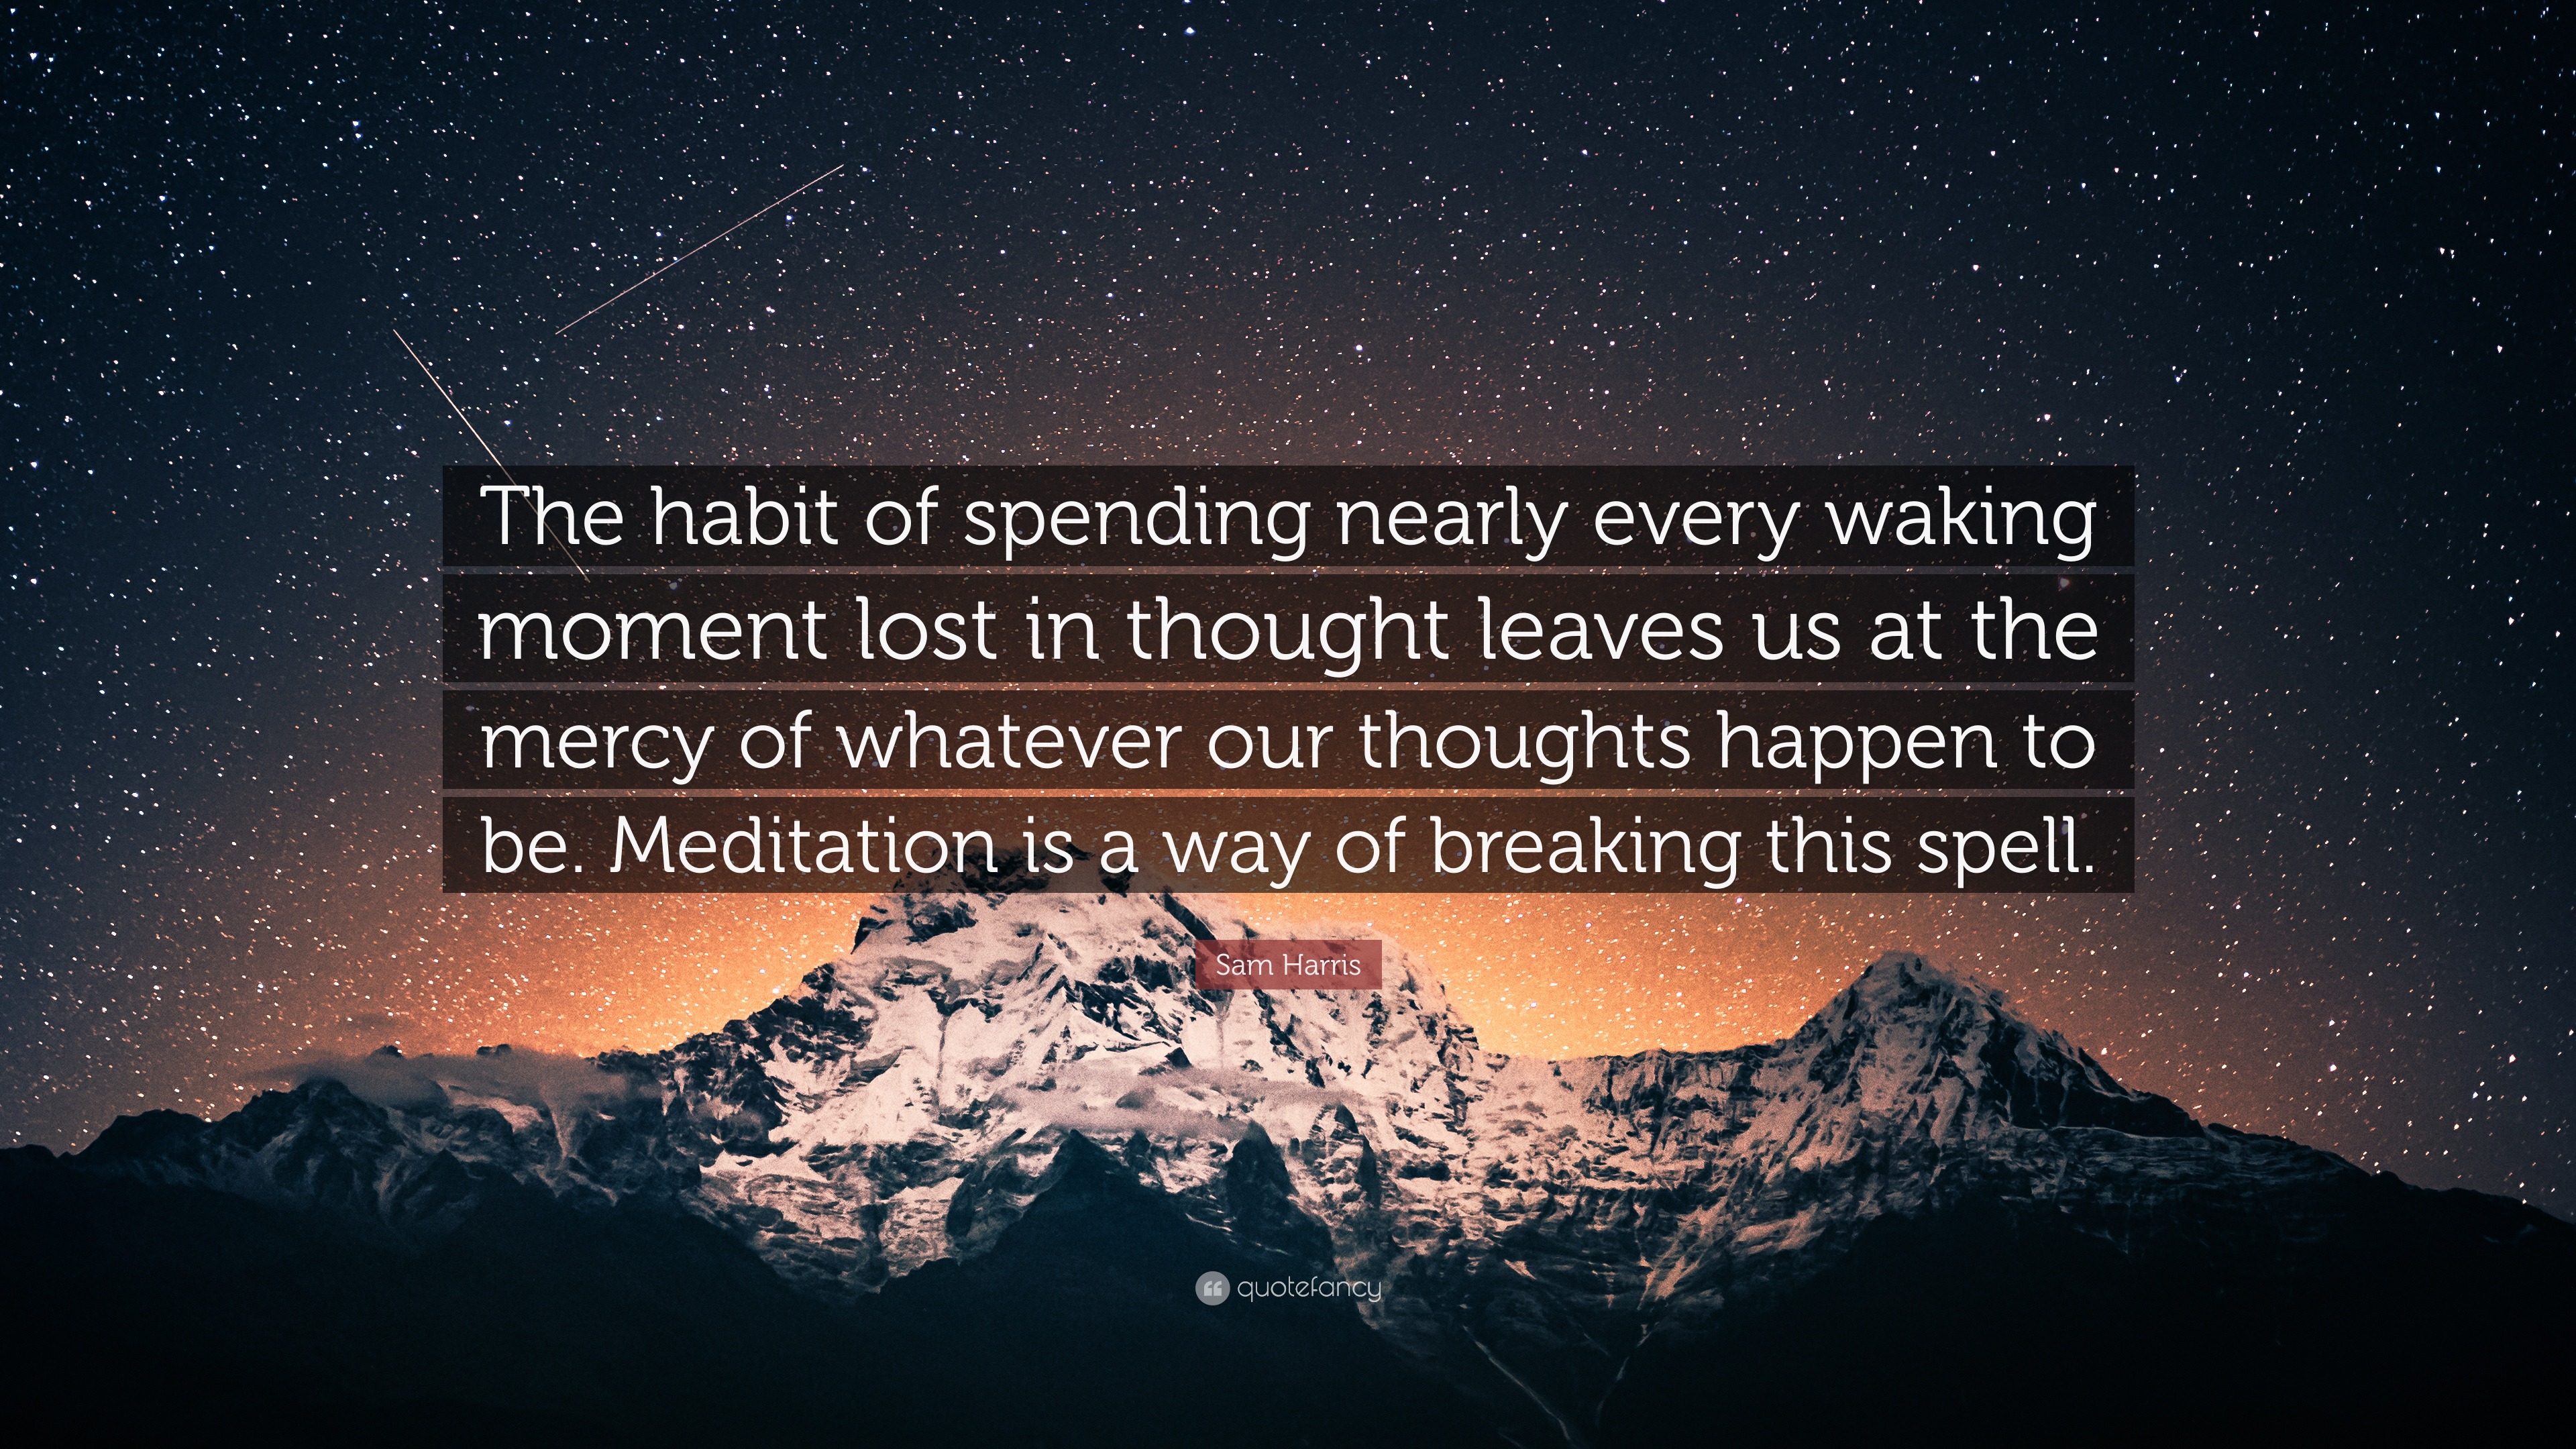 Sam Harris Quote The Habit Of Spending Nearly Every Waking Moment Lost In Thought Leaves Us At The Mercy Of Whatever Our Thoughts Happen 9 Wallpapers Quotefancy